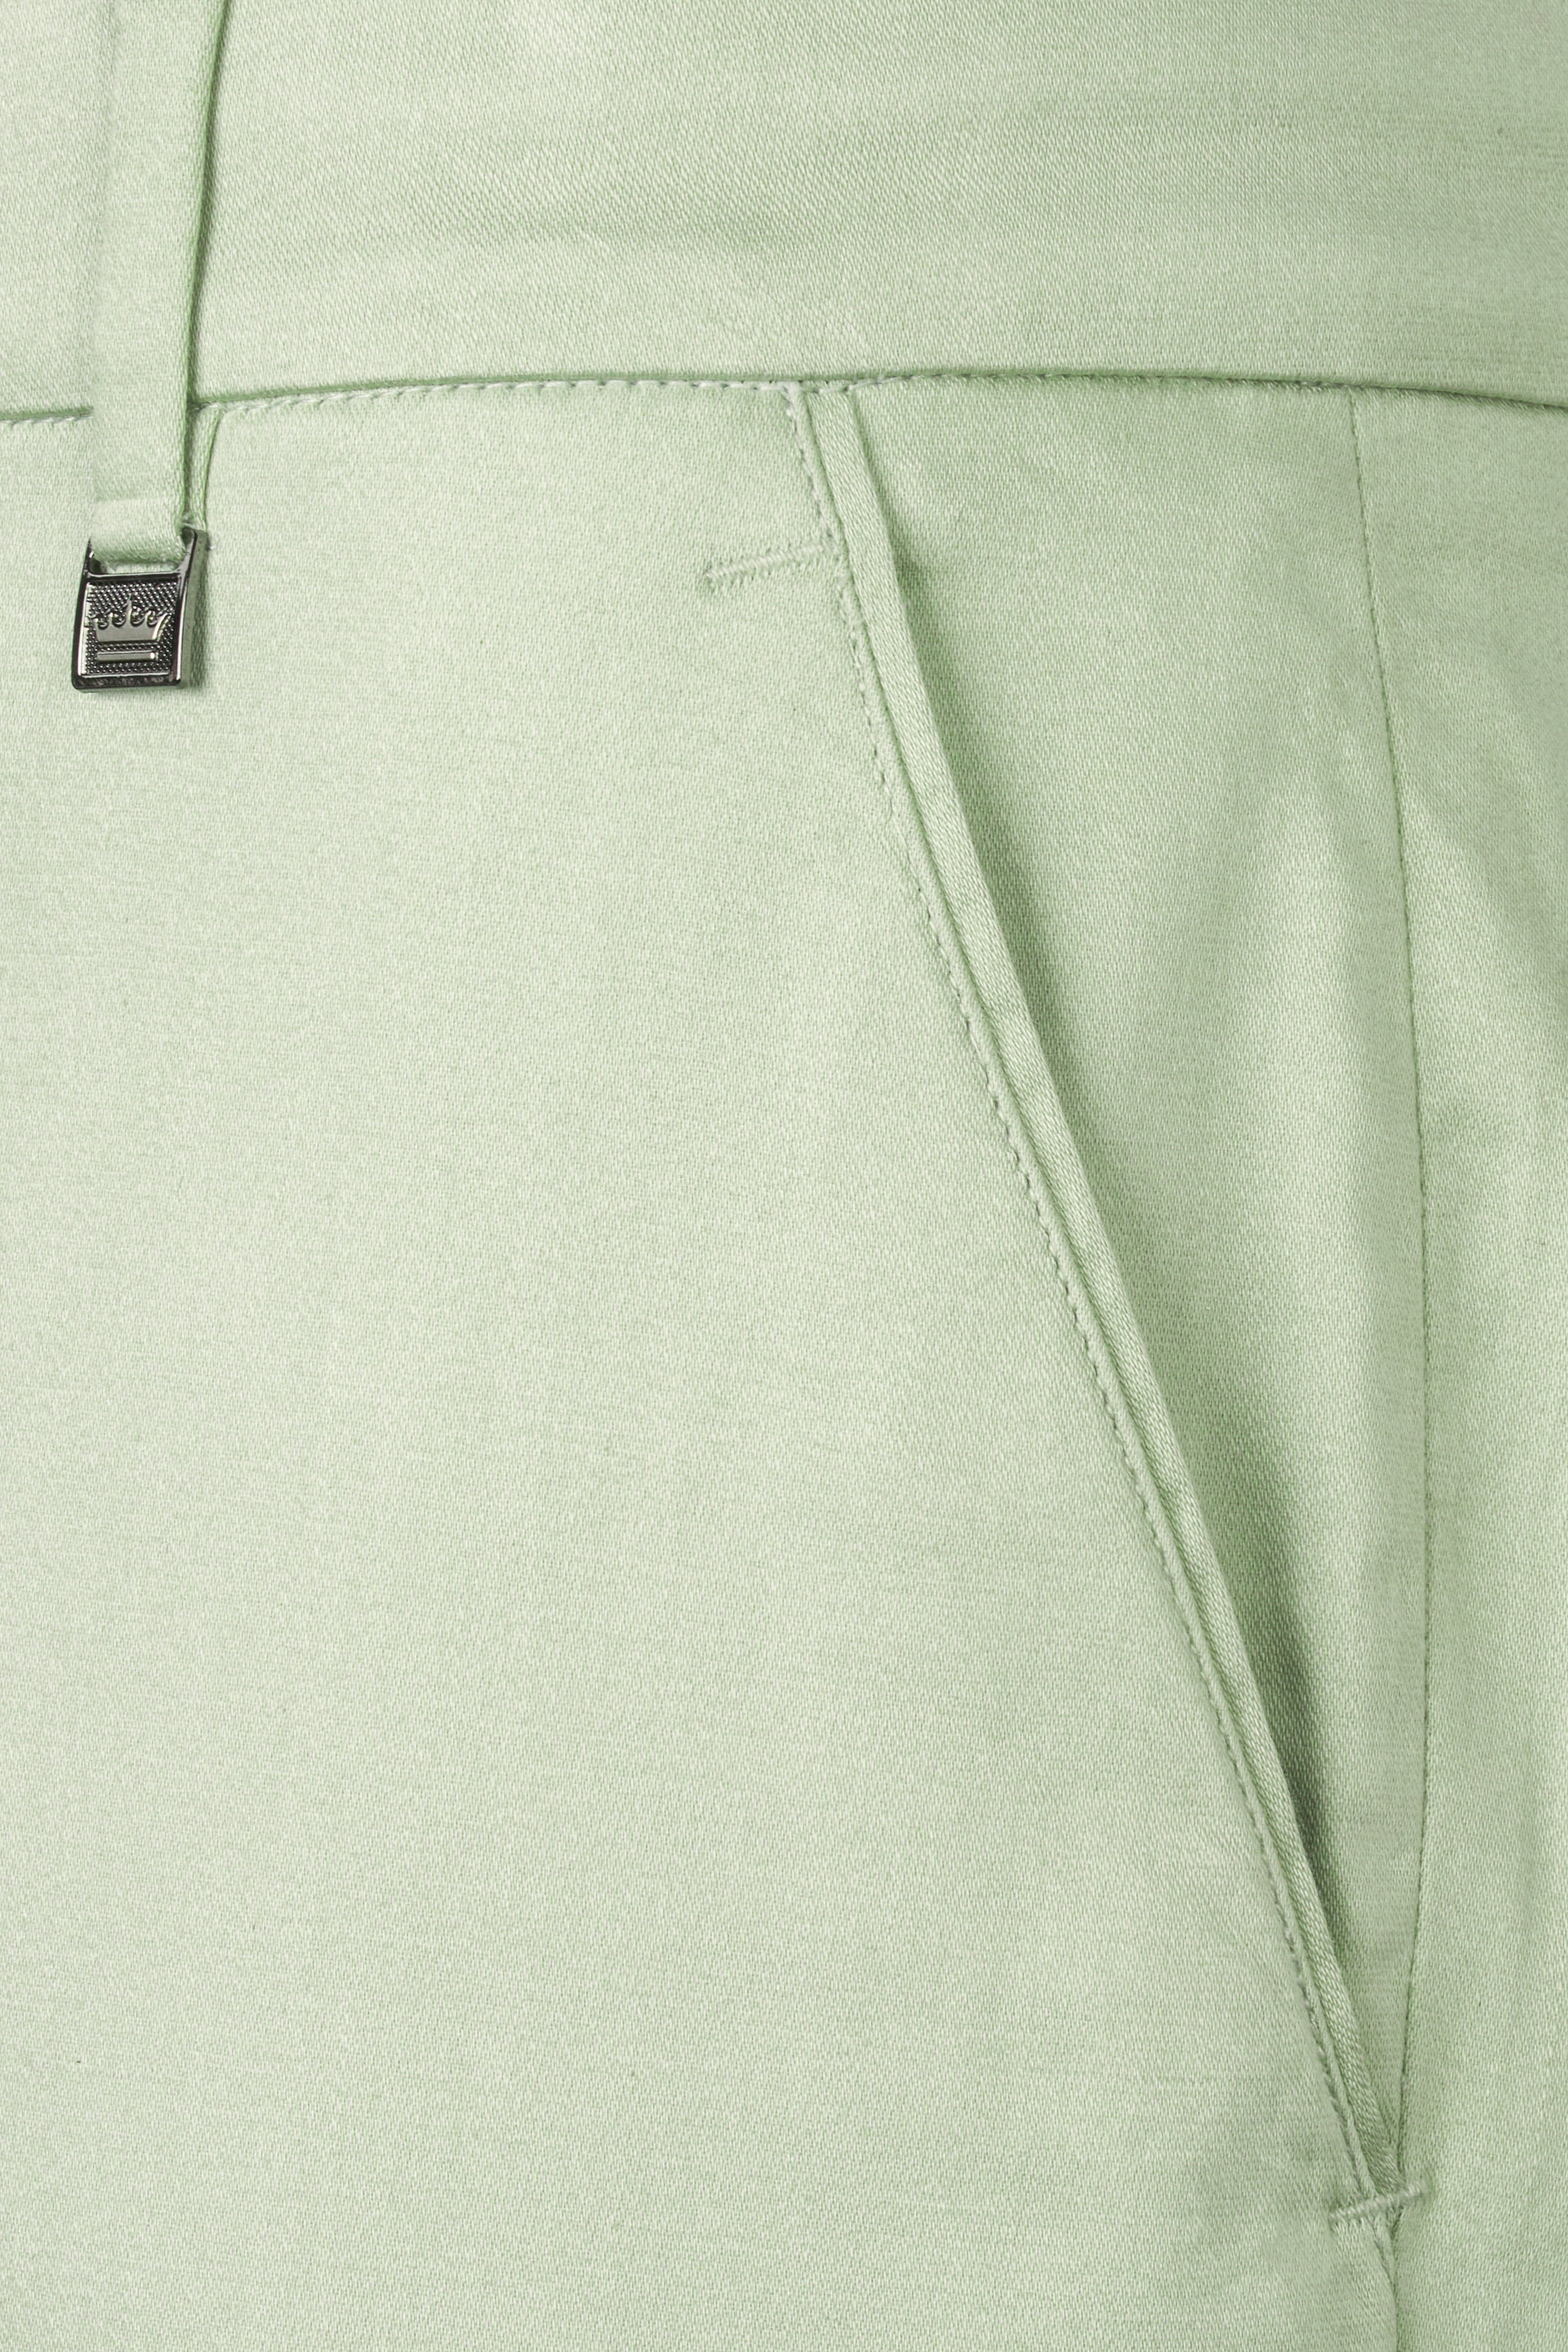 Coriander Green Double Breasted Premium Cotton Stretchable Traveler Suit ST2793-DB-36,ST2793-DB-38,ST2793-DB-40,ST2793-DB-42,ST2793-DB-44,ST2793-DB-46,ST2793-DB-48,ST2793-DB-50,ST2793-DB-52,ST2793-DB-54,ST2793-DB-56,ST2793-DB-58,ST2793-DB-60